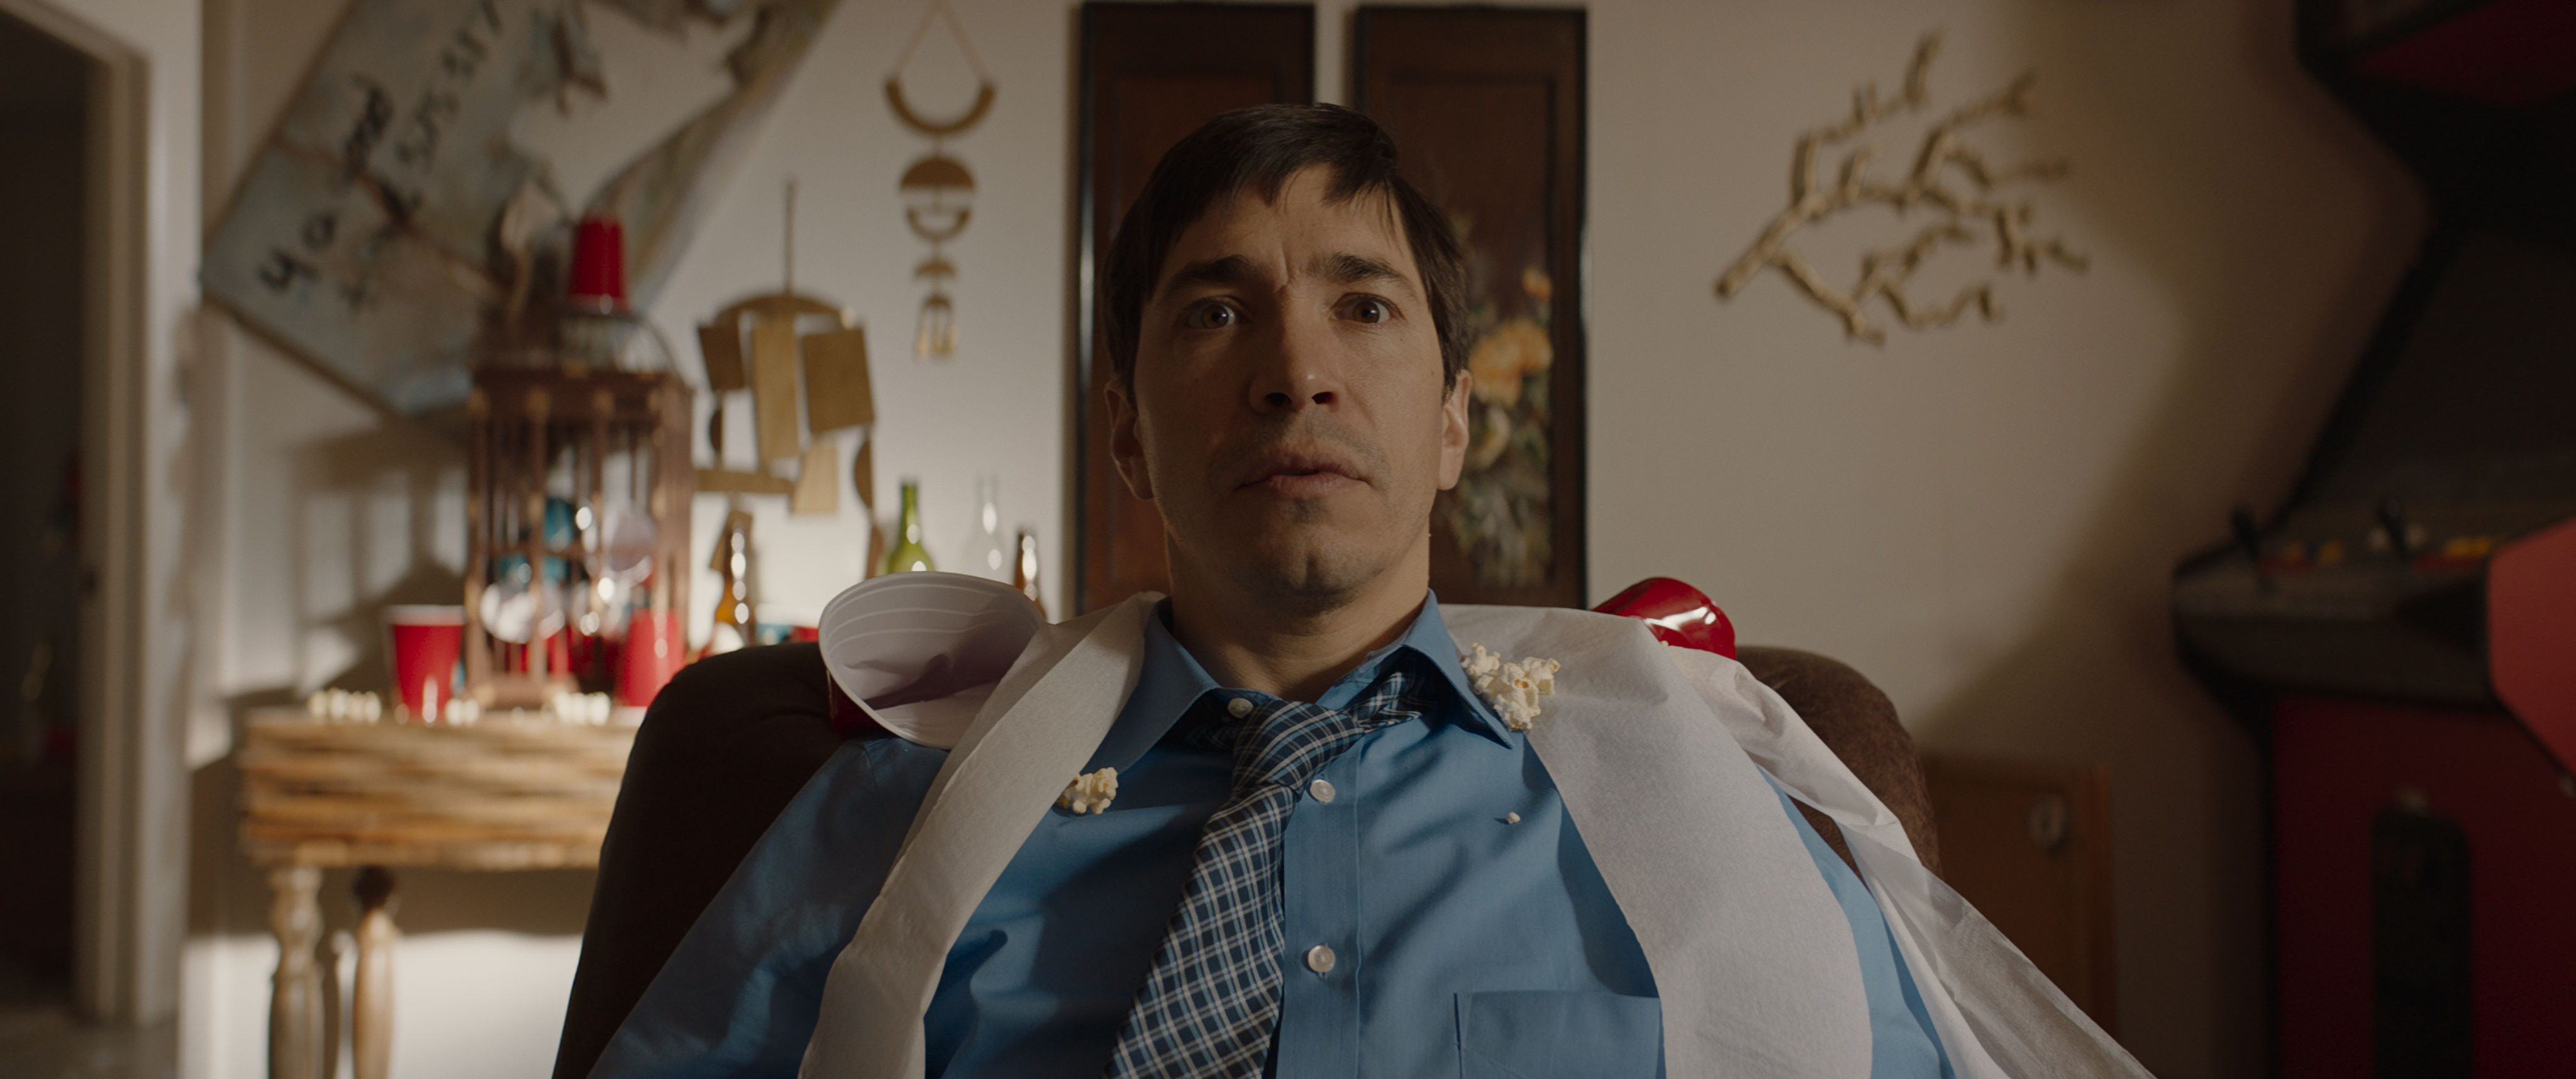 Justin Long is making his directorial debut after his trippy new movie